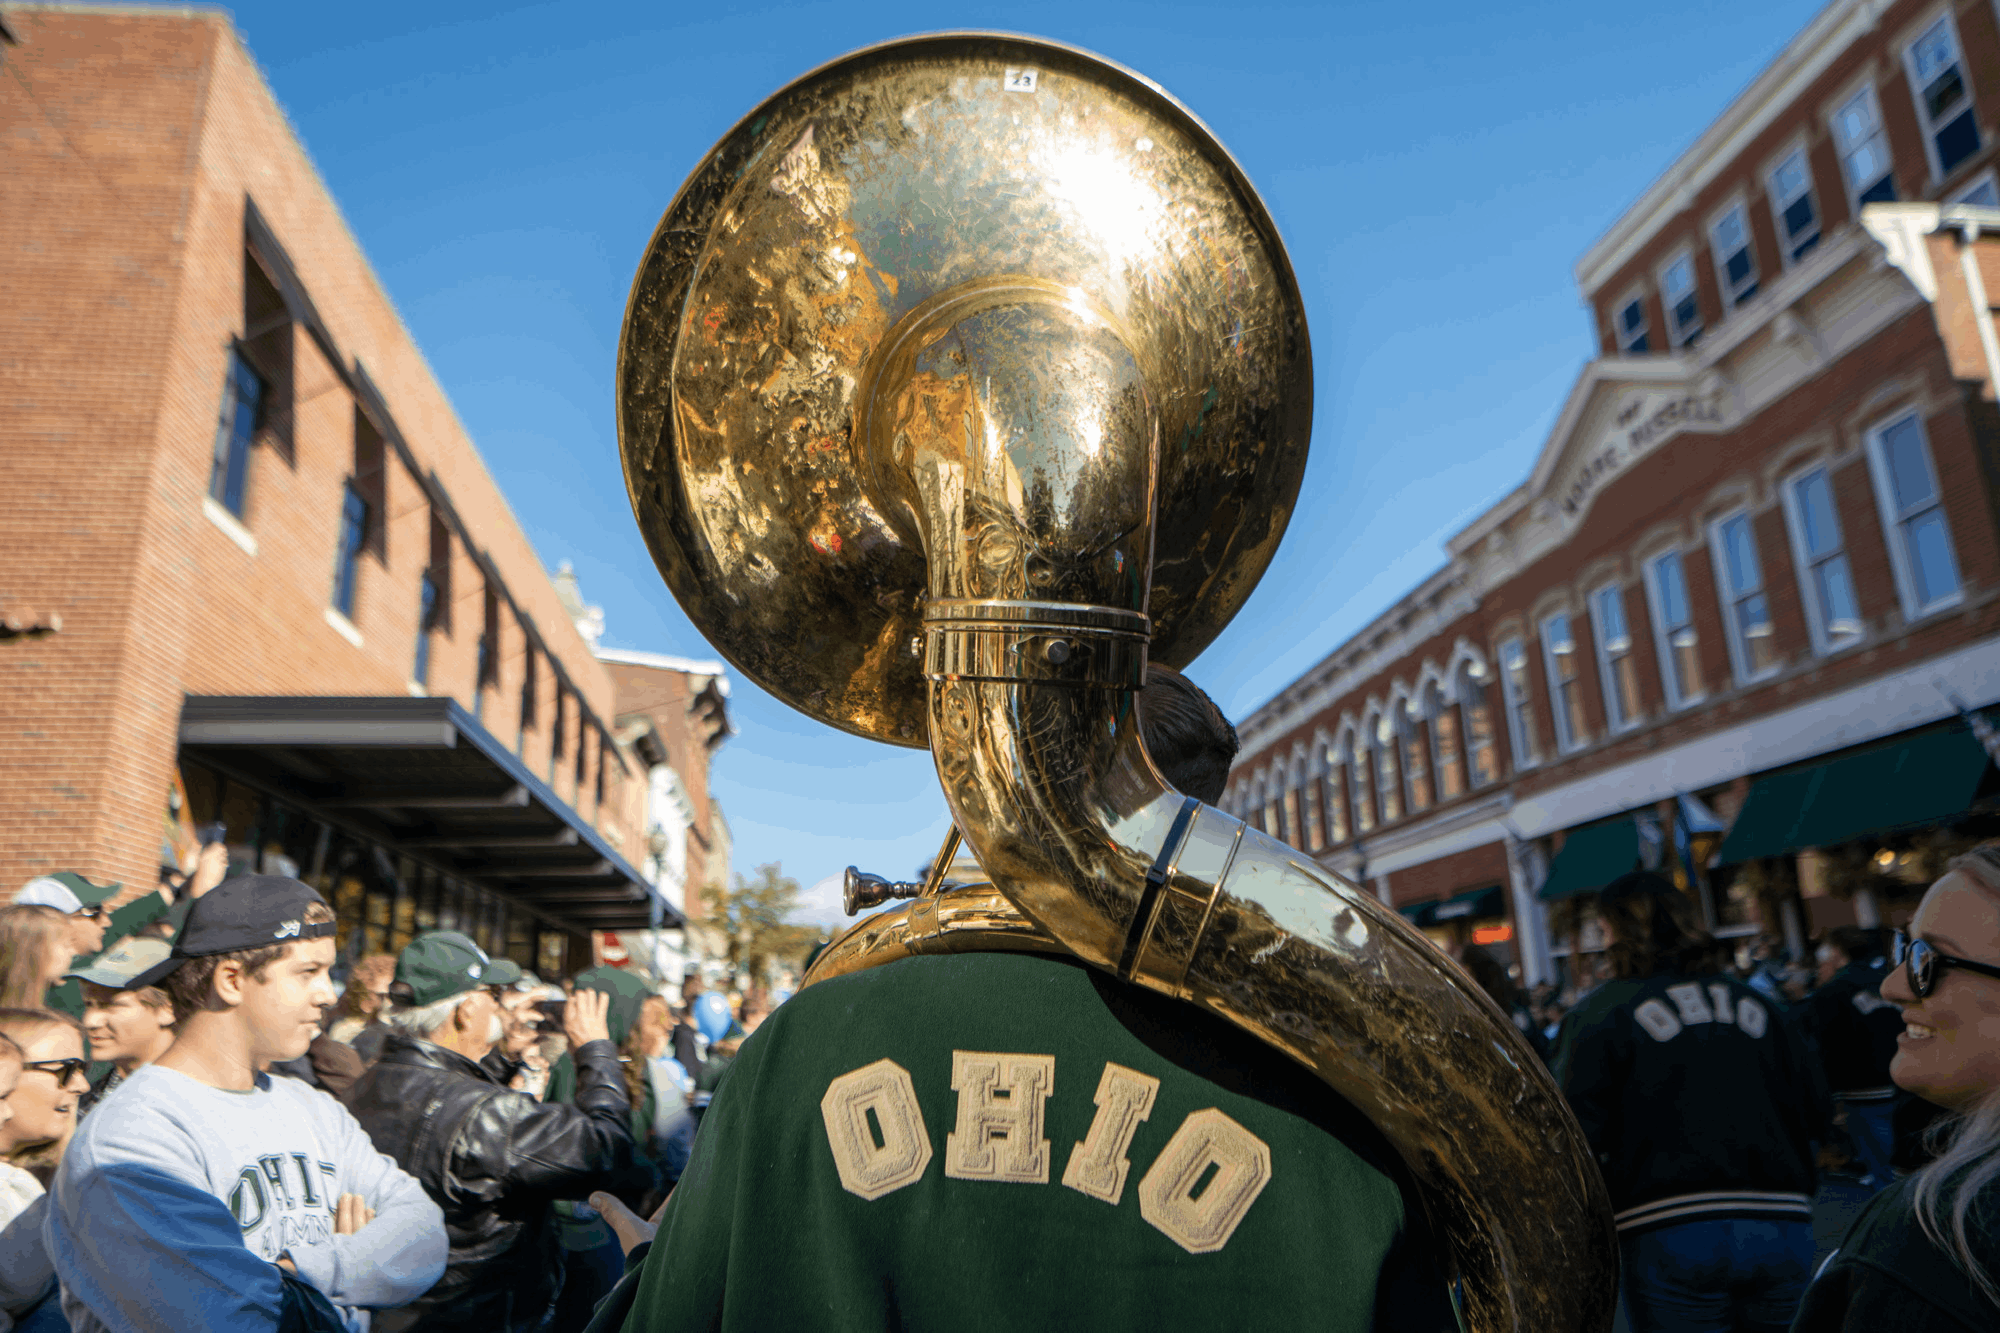 Ohio University’s Marching 110 Alumni Band has been a staple – and a favorite – of Homecoming festivities since its first performance in 1973. 